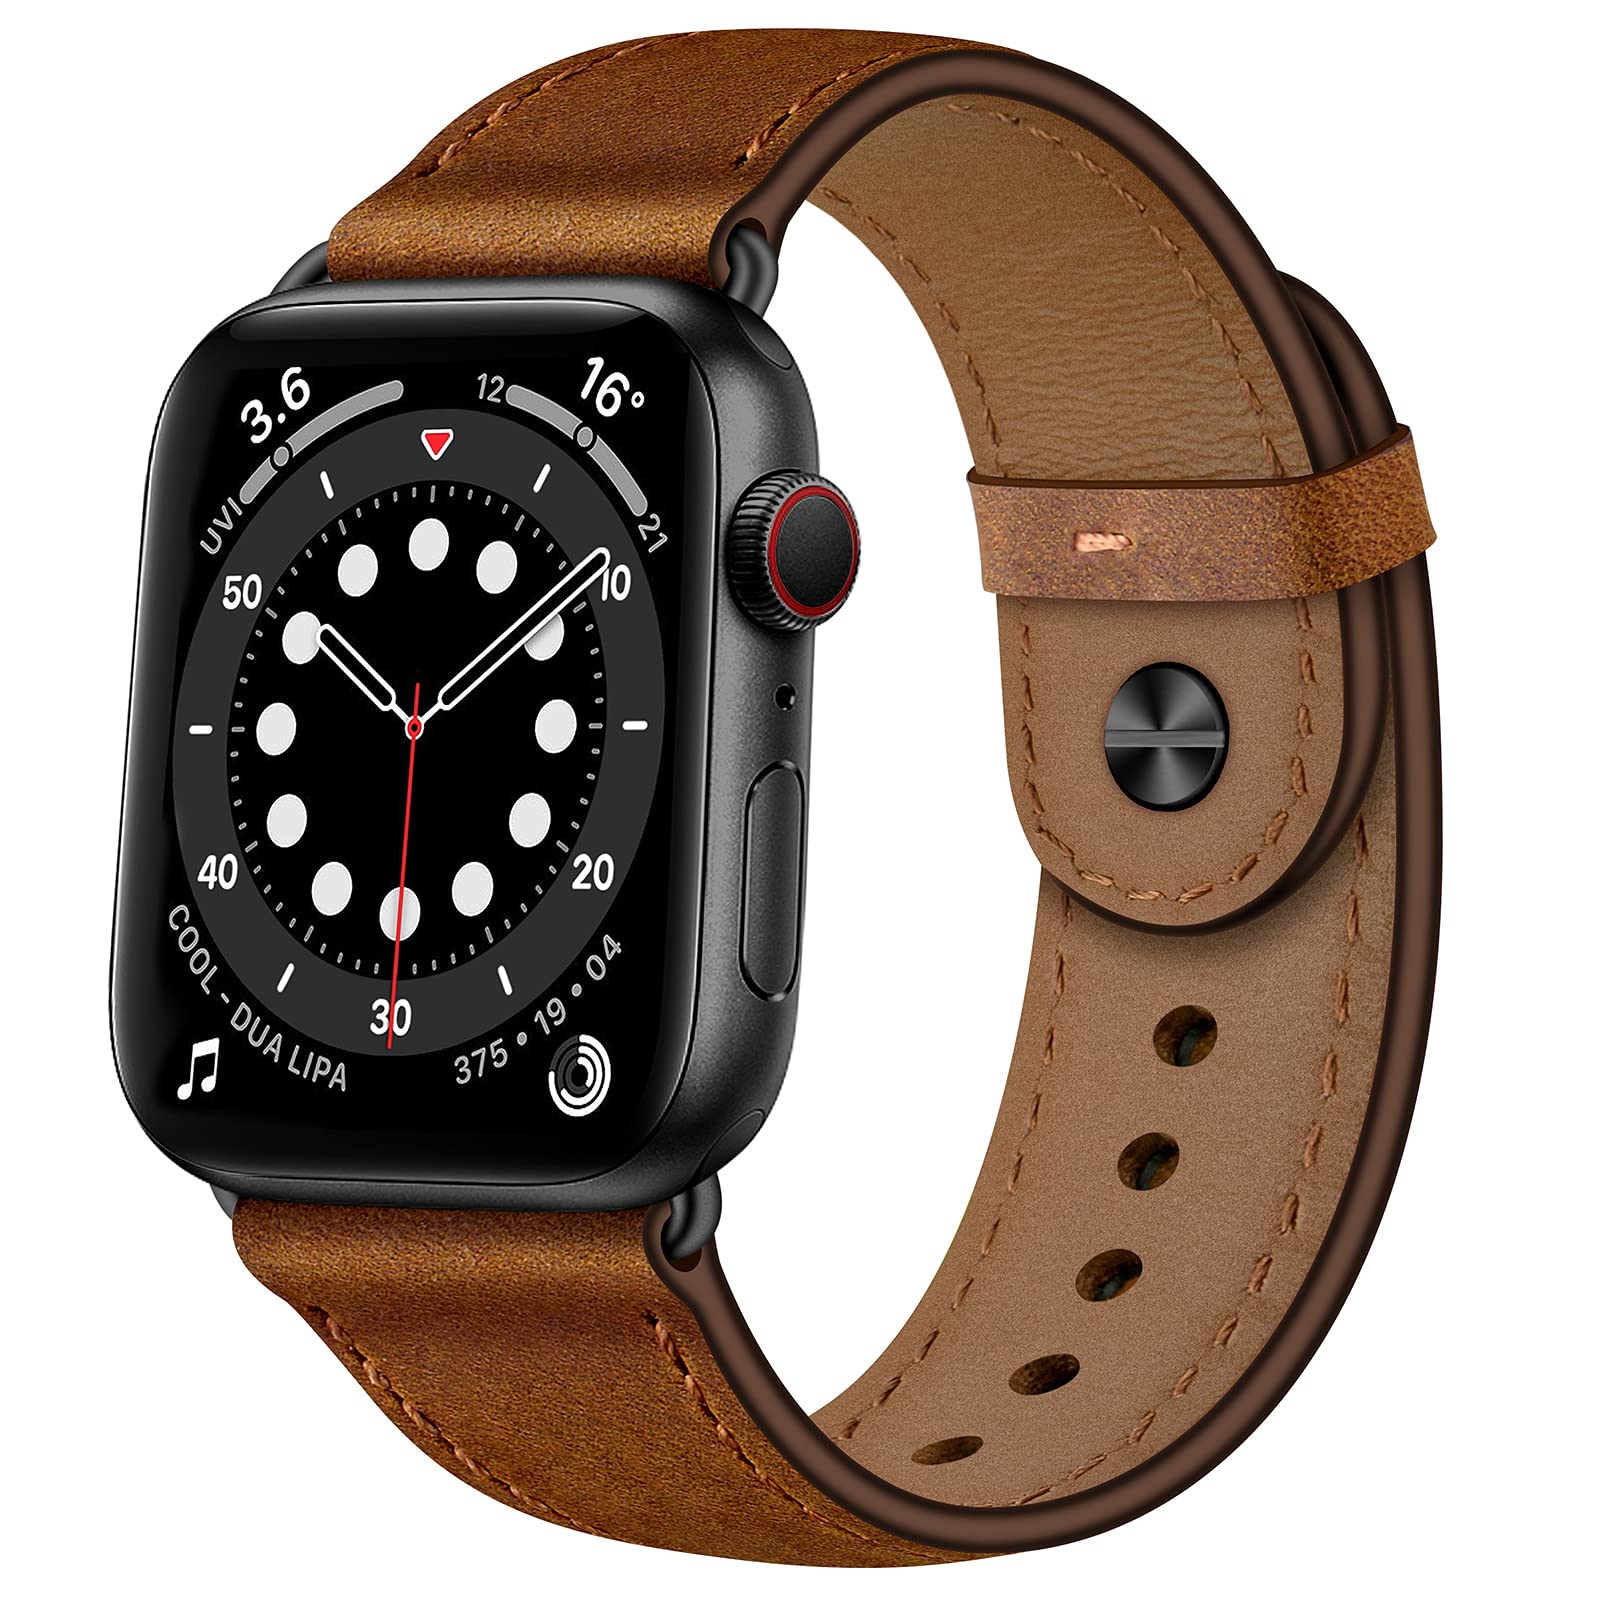 Genuine Leather Strap For Apple Watch Bands Series SE 7 6 5 4 3